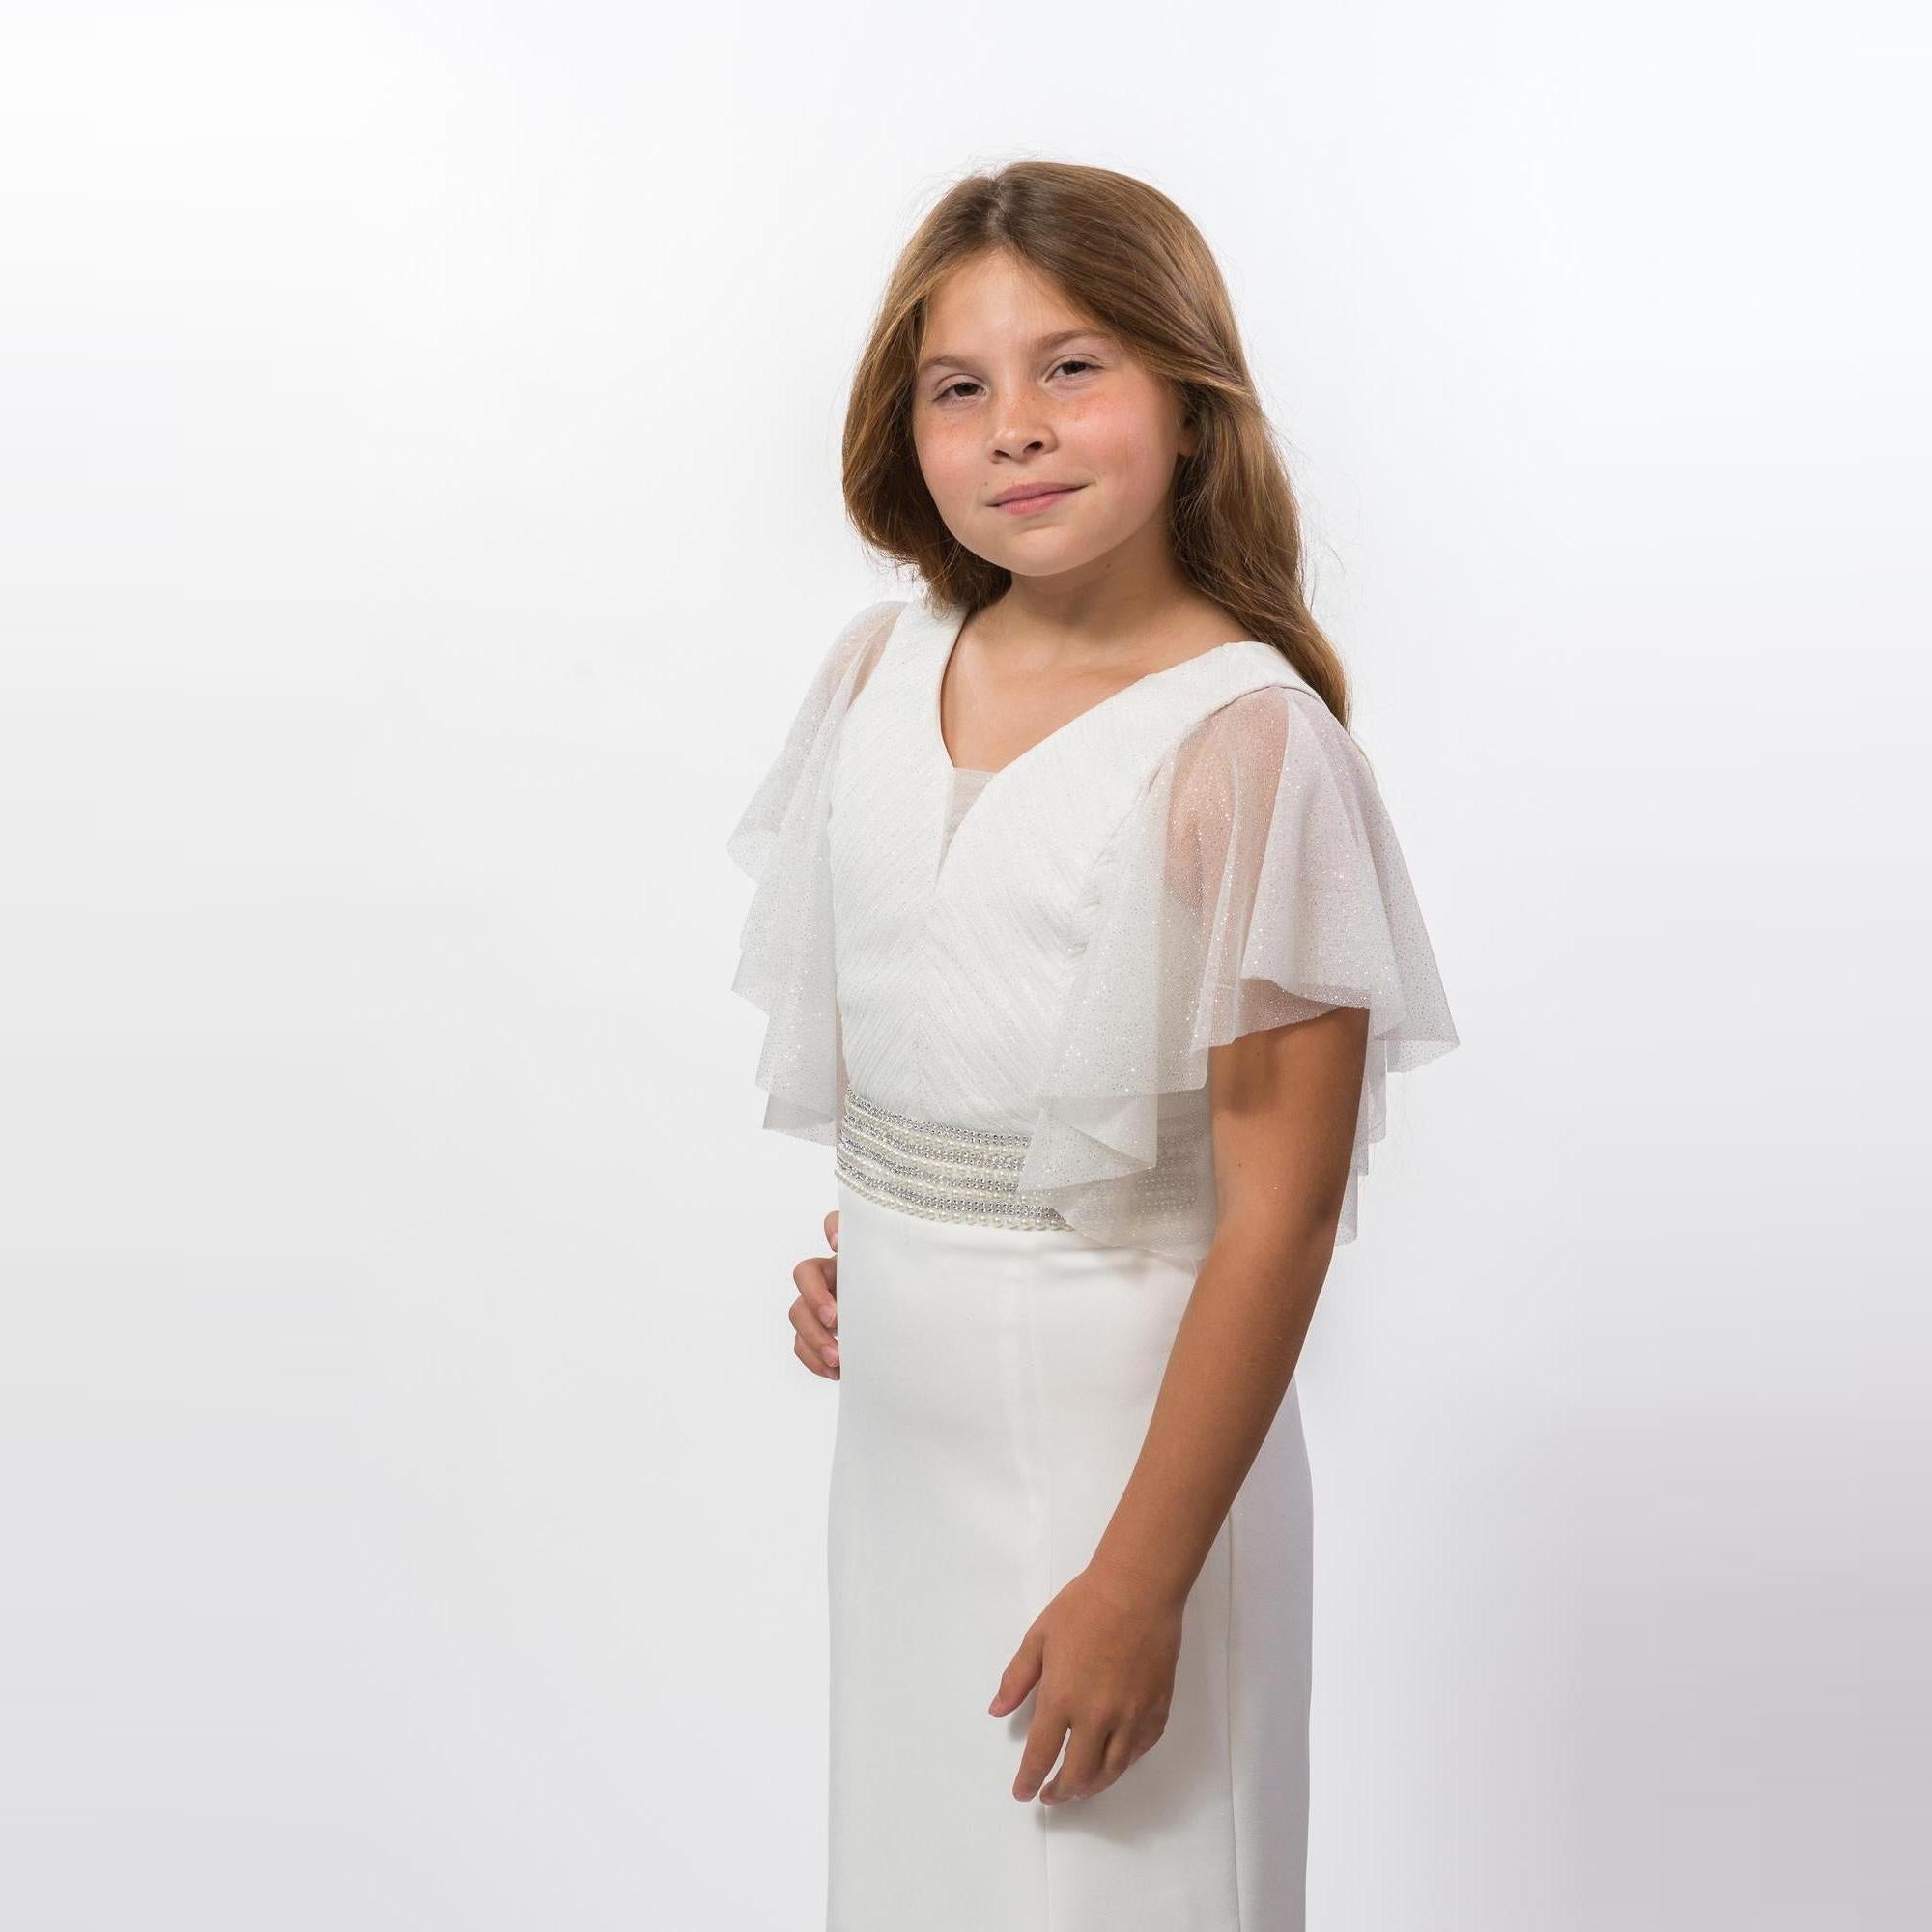 Tania's Gown Girls Formal Dress